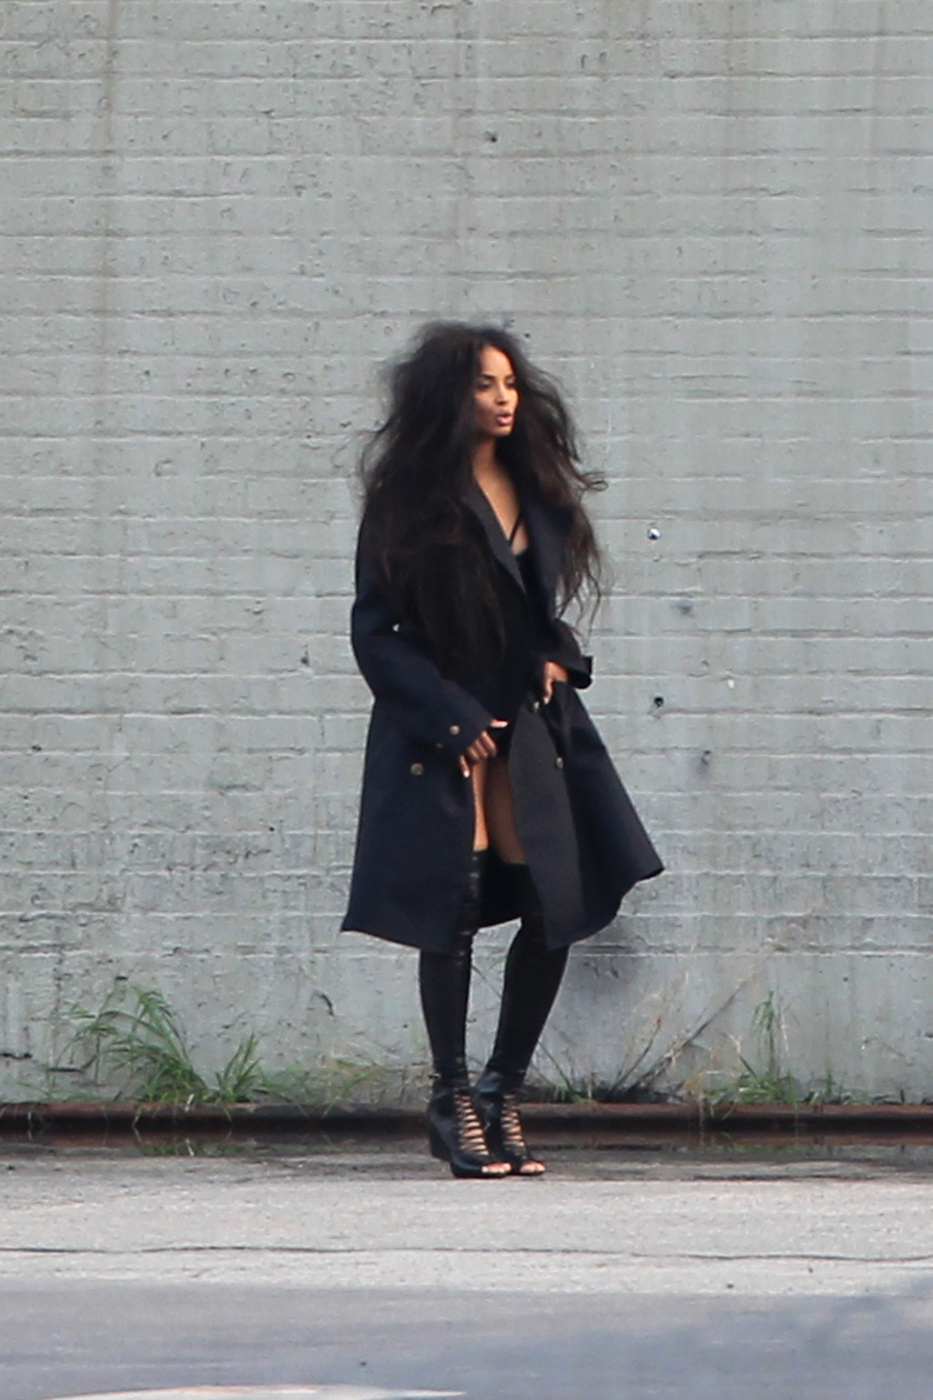 Ciara is seen doing a photo shoot for Vogue Magazine in Los Angeles